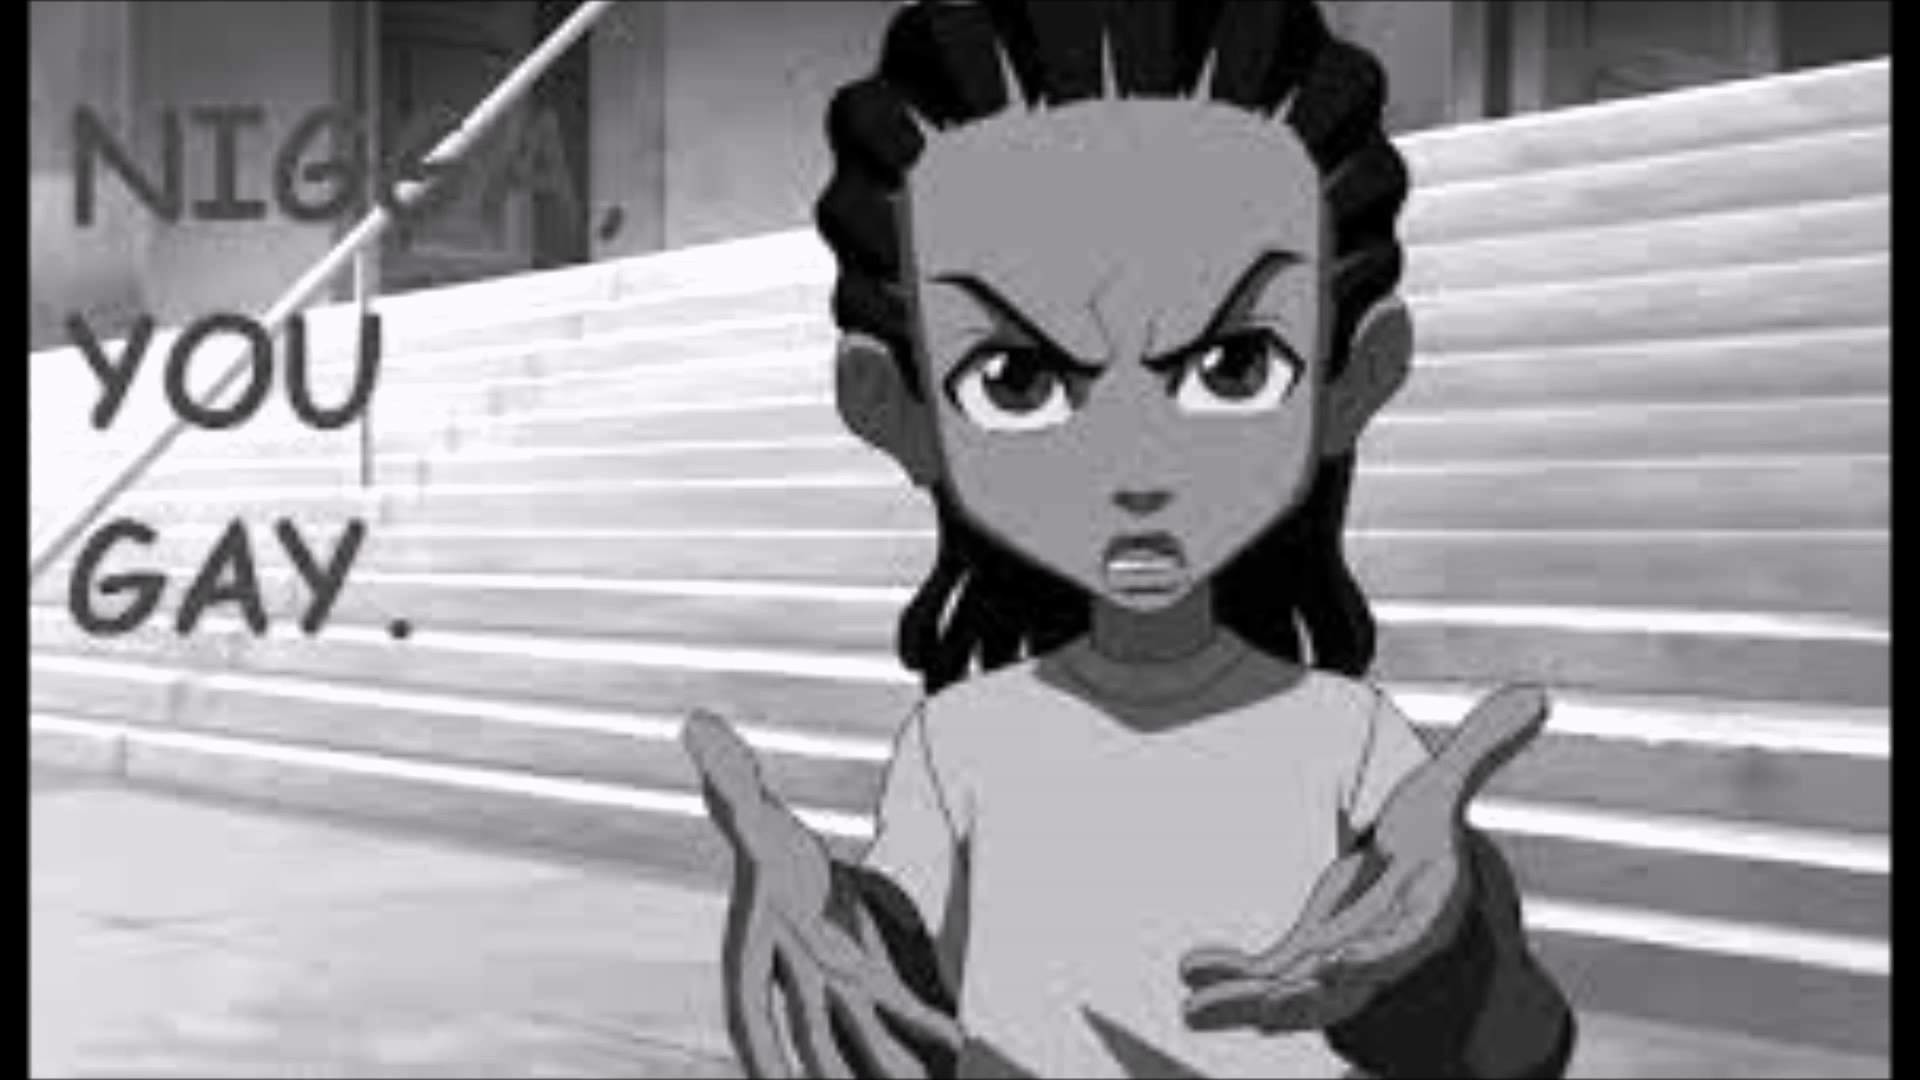 1920x1080 The Boondocks Riley Nigga You Gay Quote Beat Prod By DJ Ron Productions -  YouTube